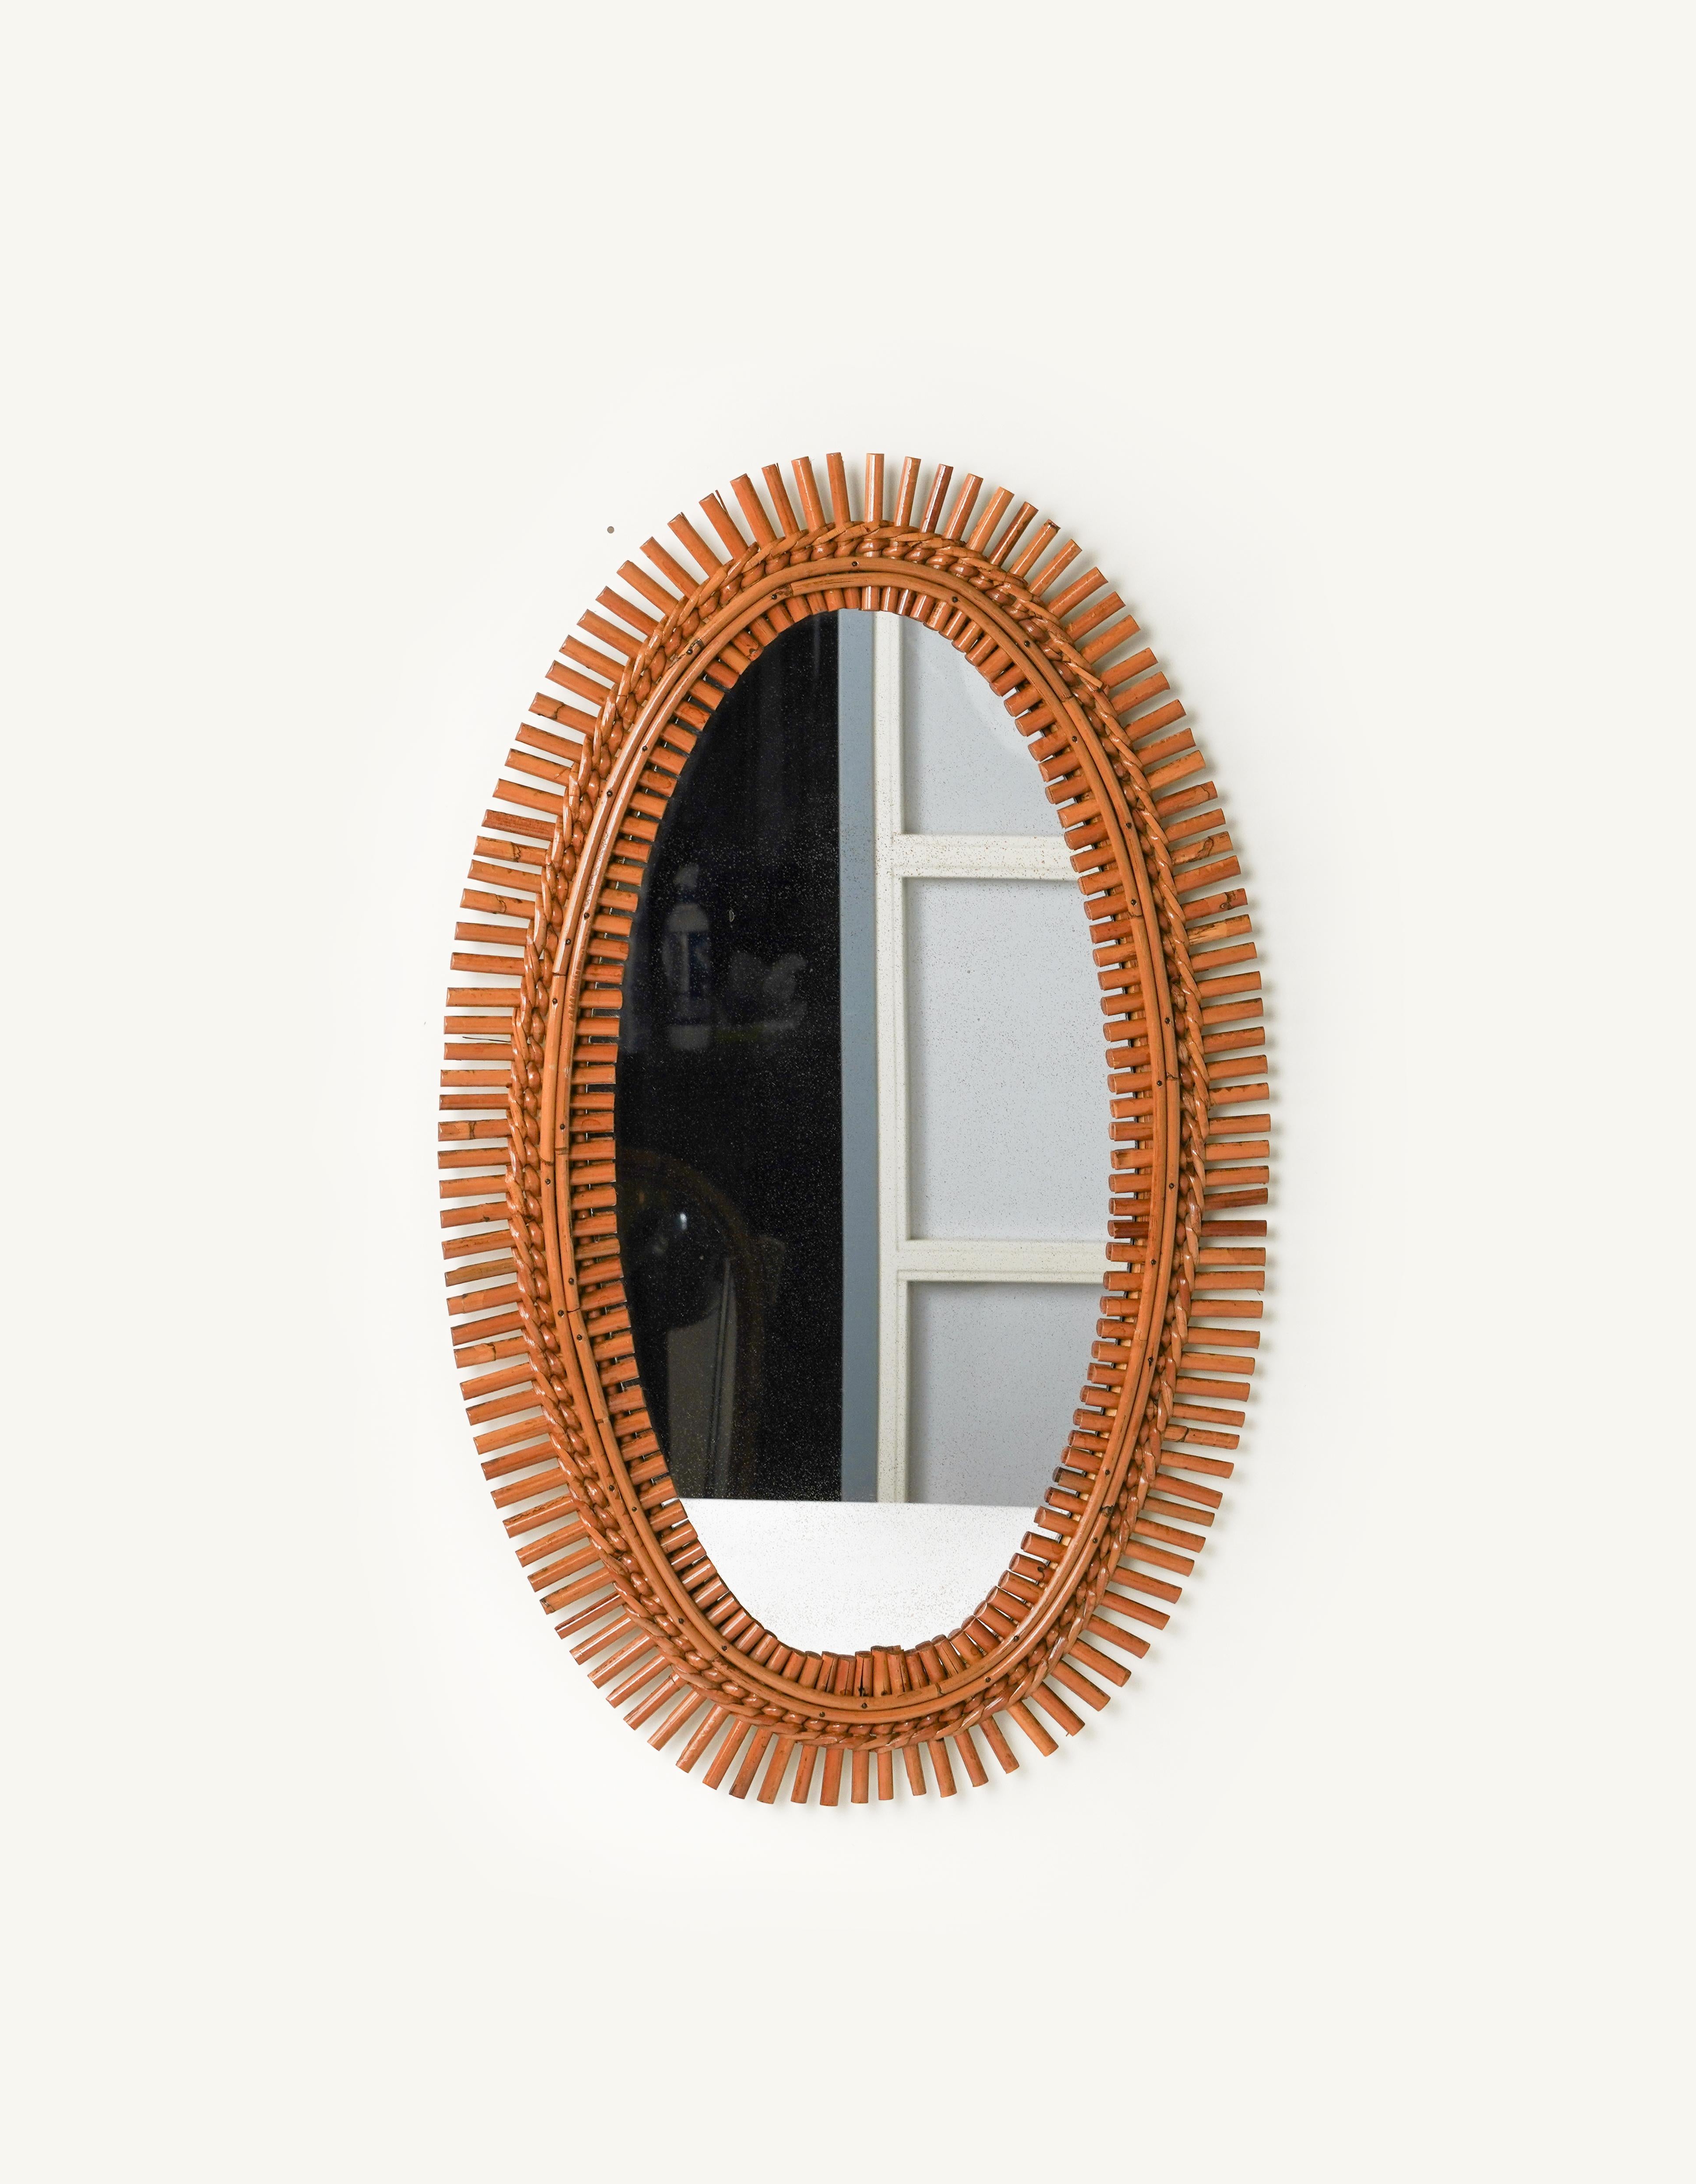 Midcentury Rattan and Bamboo Oval Wall Mirror, Italy 1960s For Sale 3